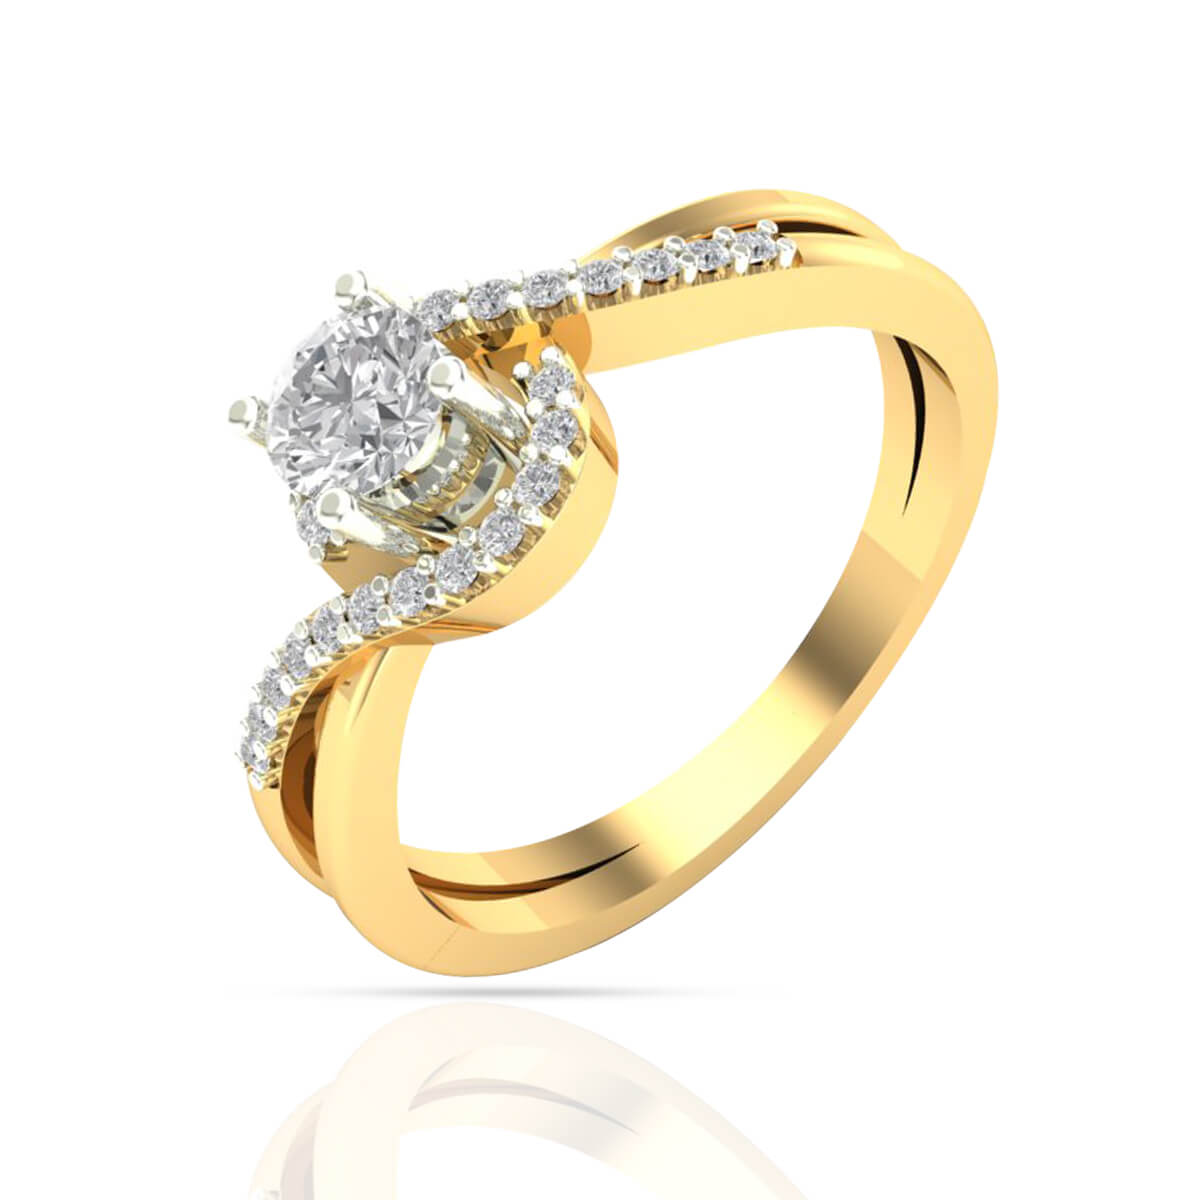 BUY DIAMOND AND GOLD RINGS FOR WOMEN AND GIRLS ONLINE - WHP Jewellers